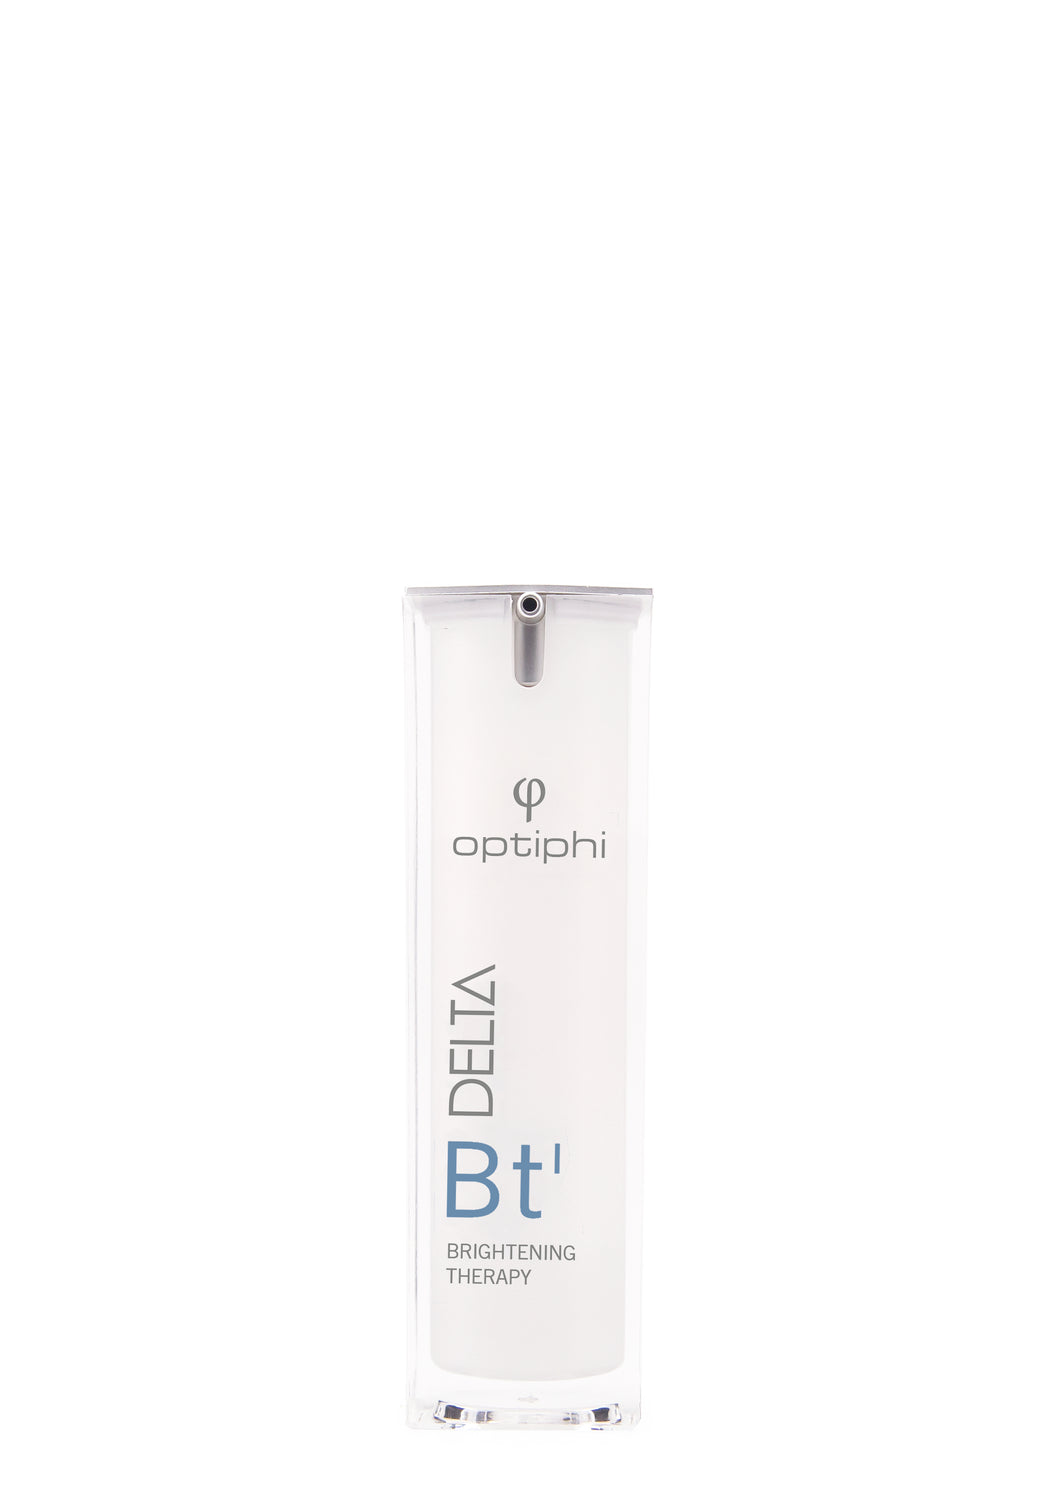 The lightweight serum is designed to target the appearance pigmentation using a synergistic 9-step approach.  The unique approach of this topical product targets post-inflammatory hyperpigmentation and sun spots